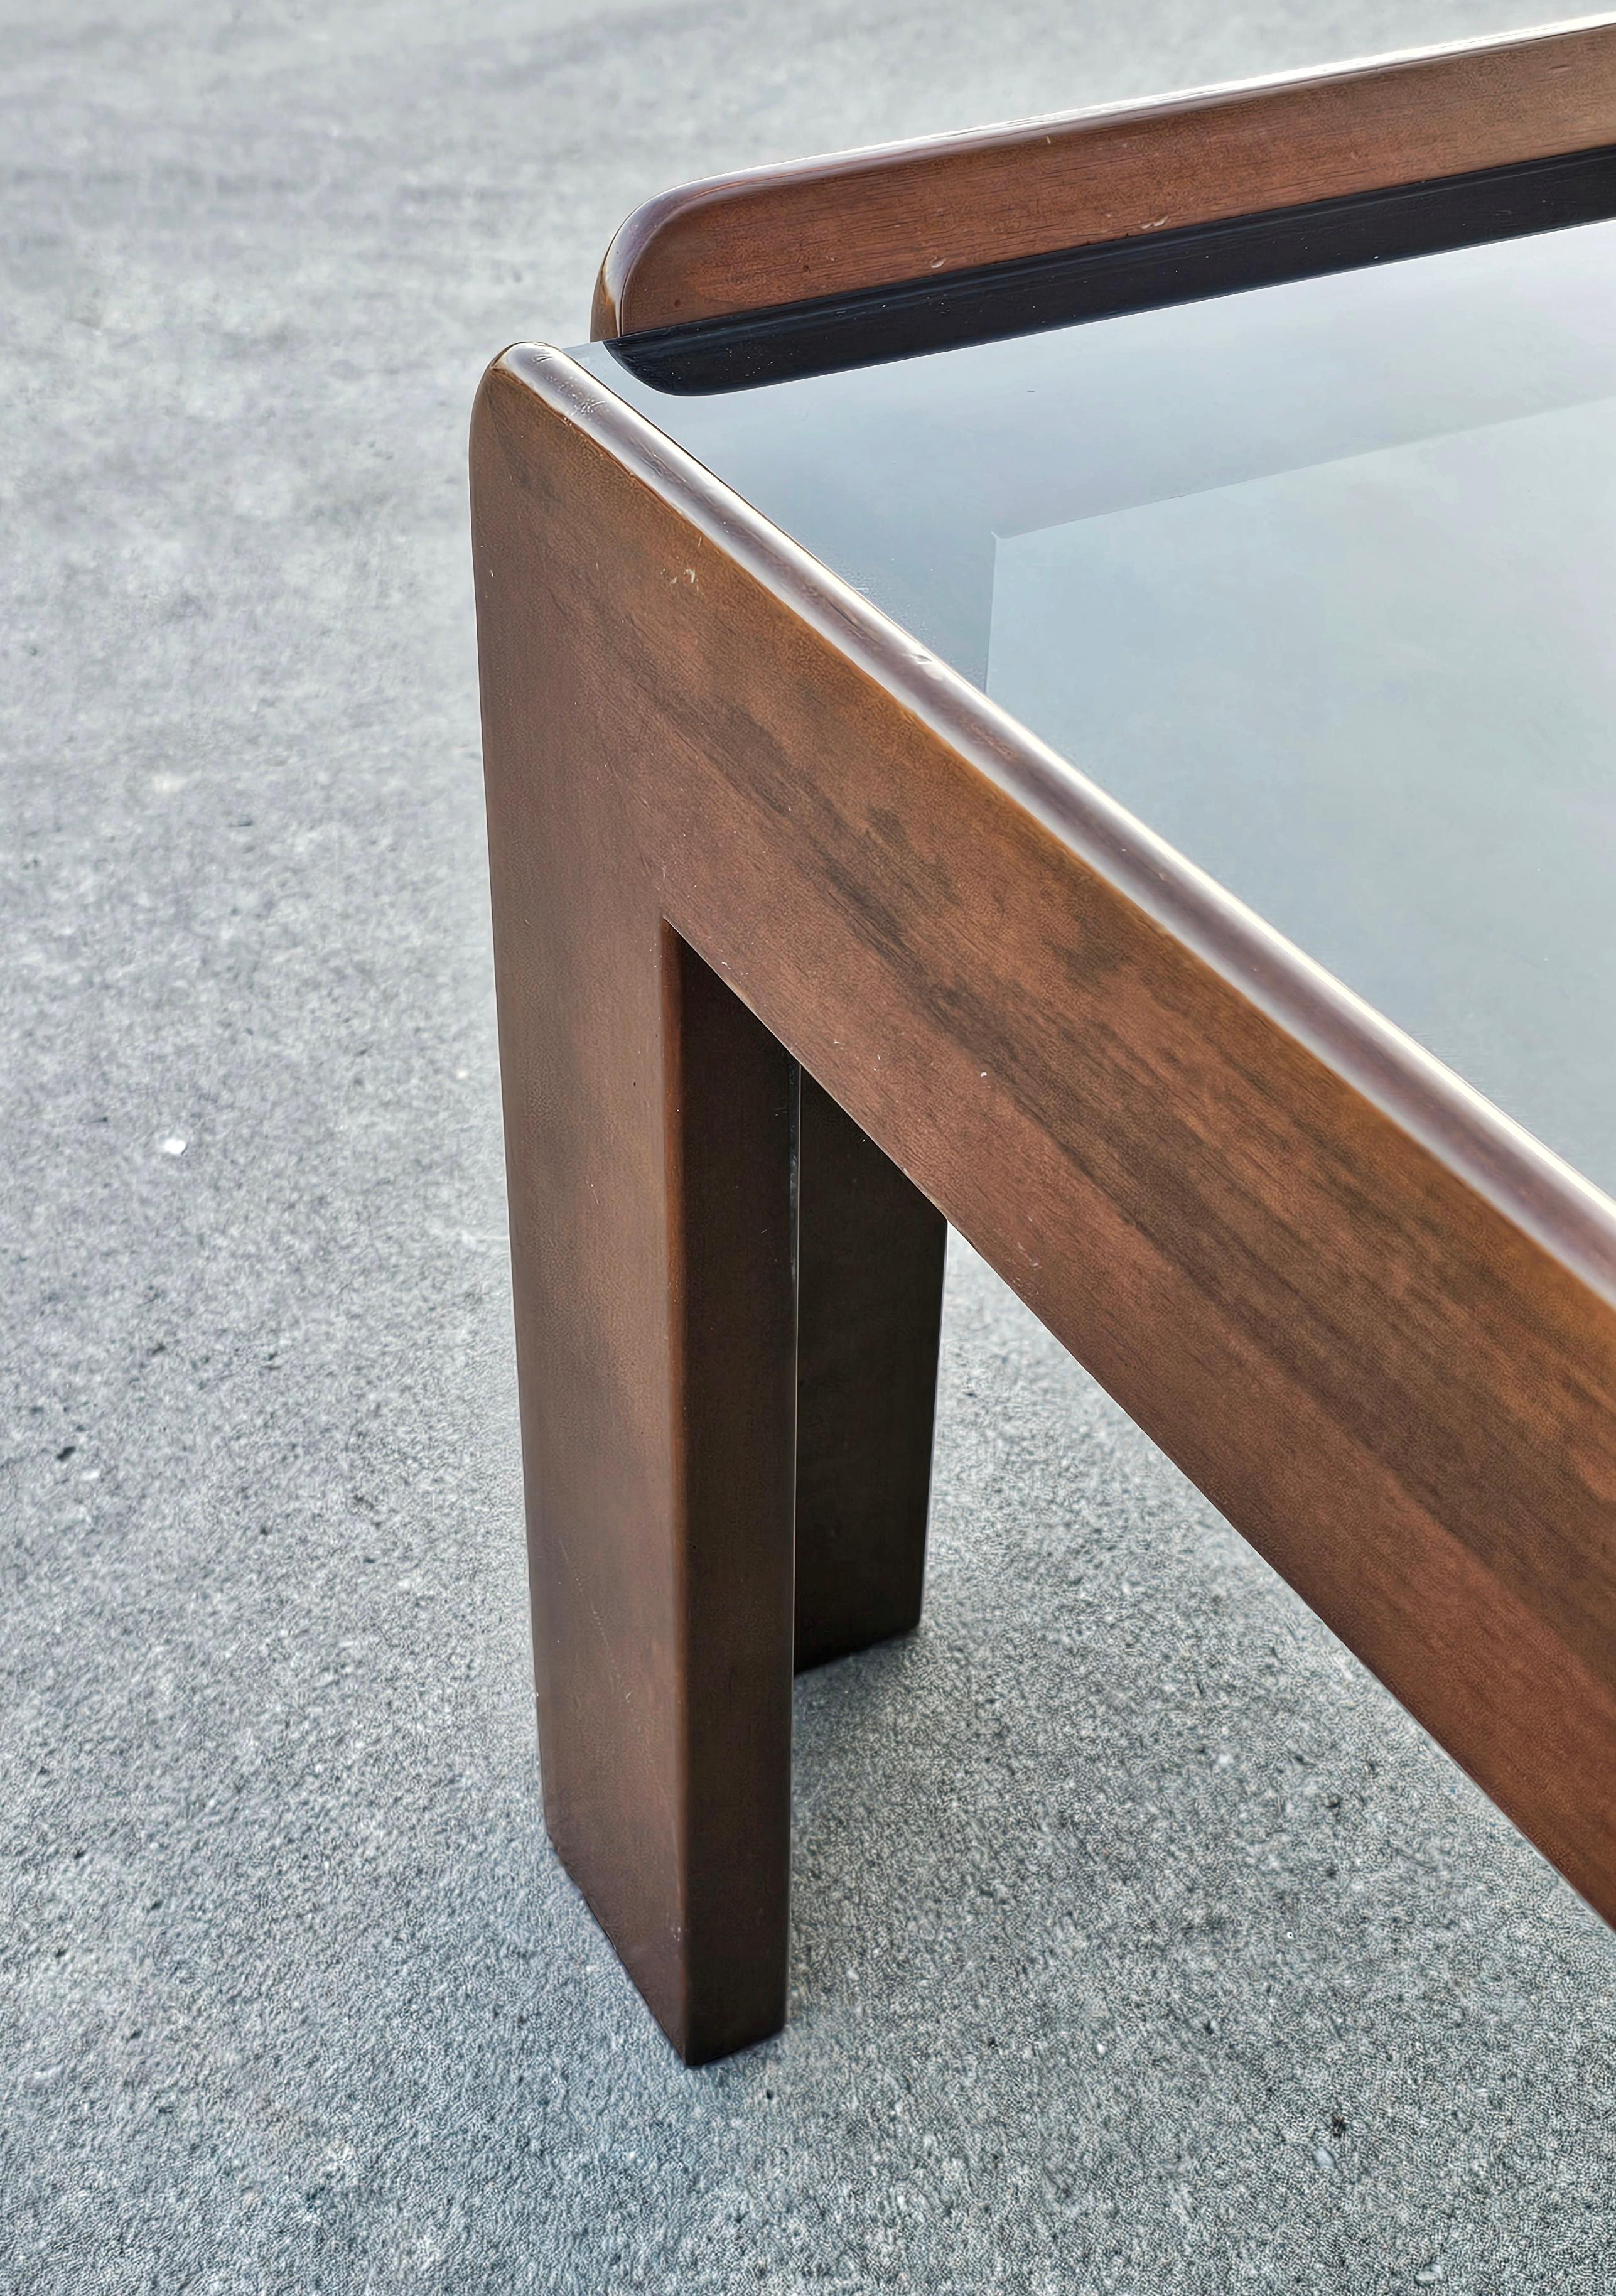 Mid-20th Century MCM Coffee Table in Walnut and Smoke Glass by Afra and Tobia Scarpa, Italy 1960s For Sale